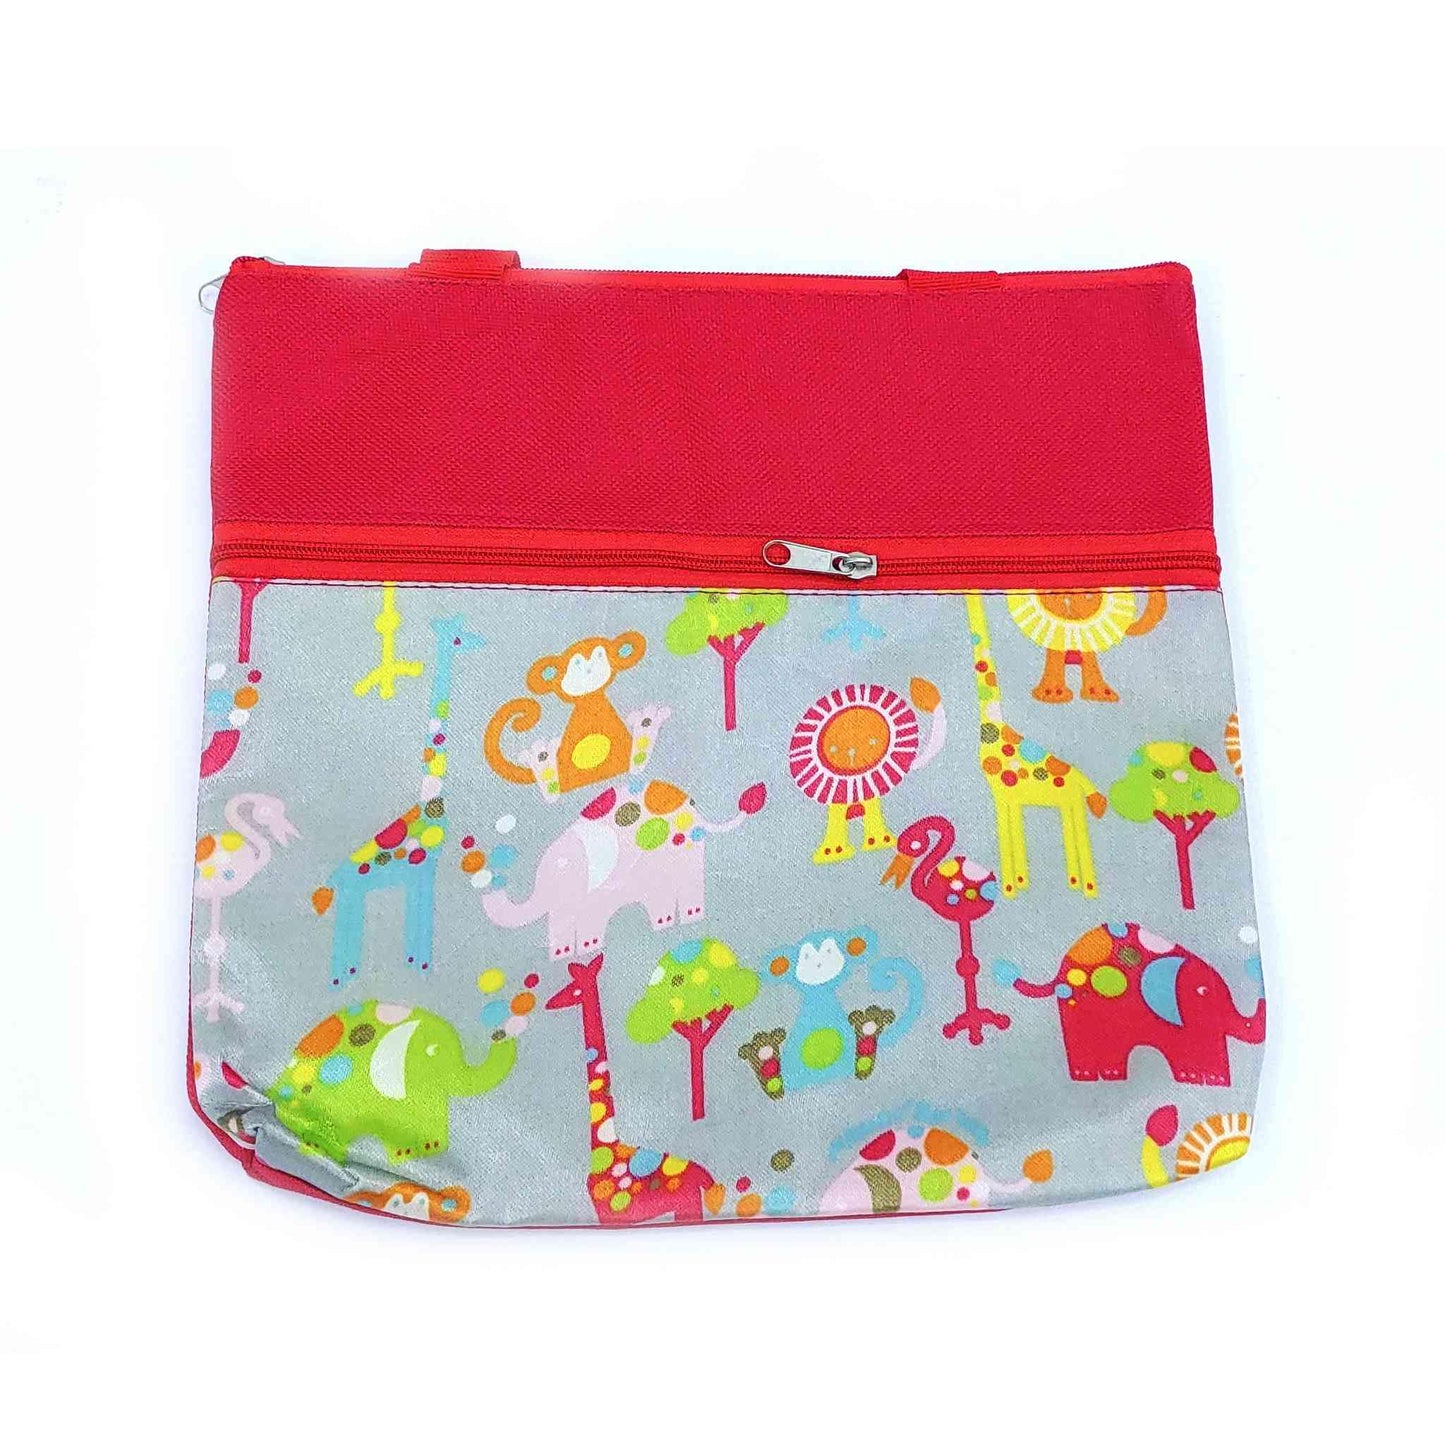 Imported Durable Canvas Printed multi purpose utility Medium size Bag with handles for all occasions for the girls and ladies, Design 5, Red - Indian Petals